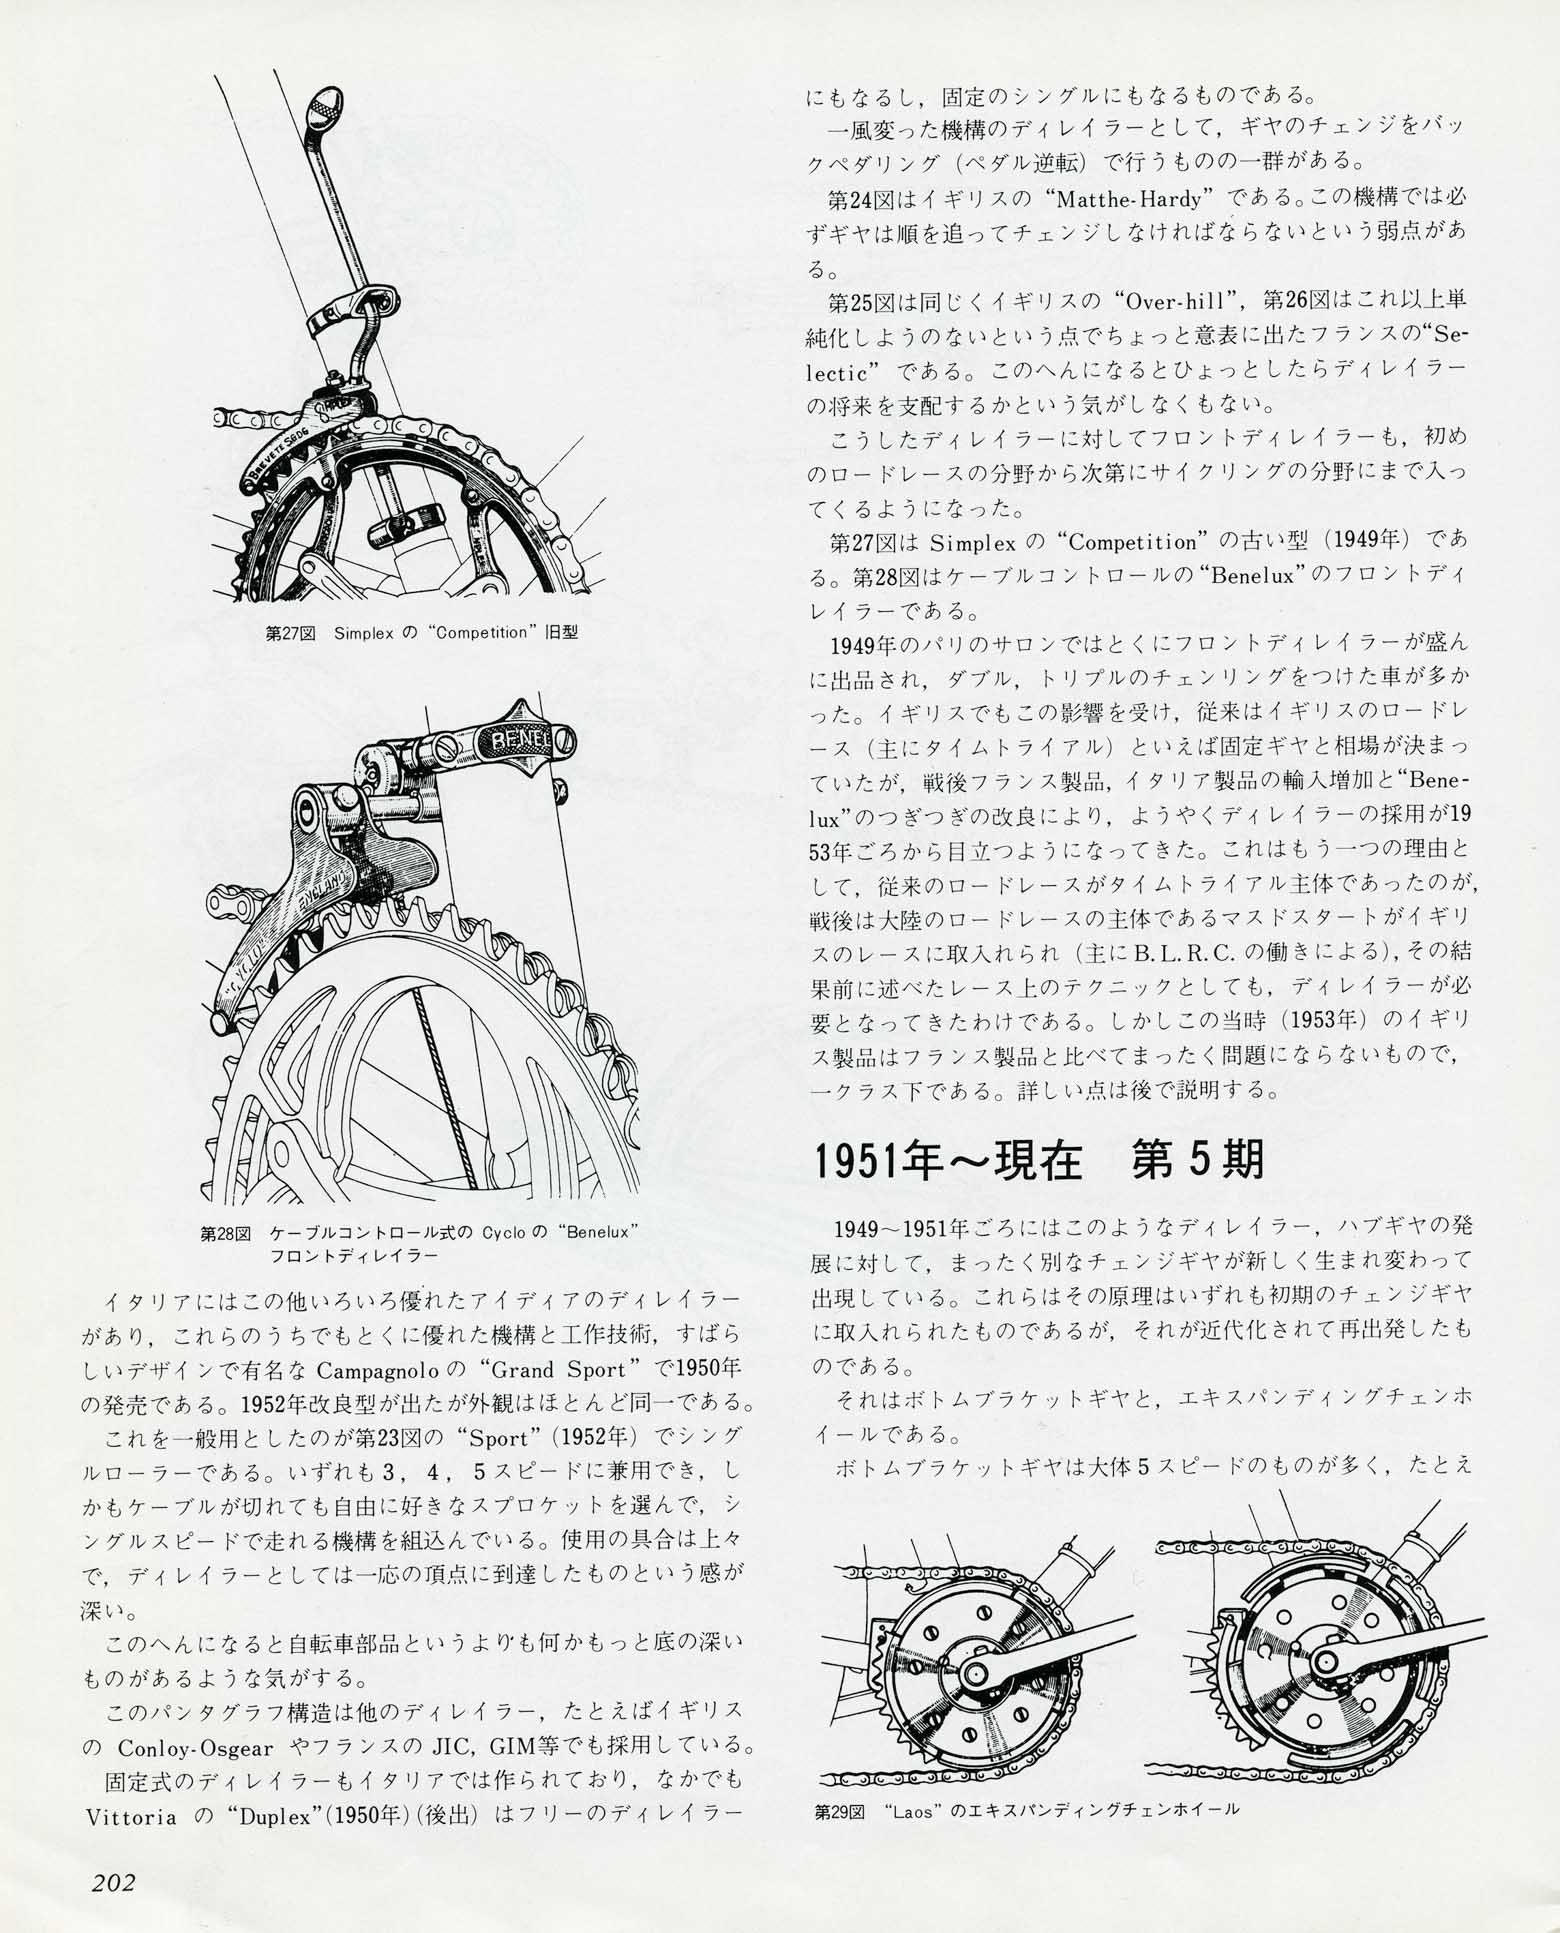 New Cycling May 1981 - Derailleur Collection page 202 main image